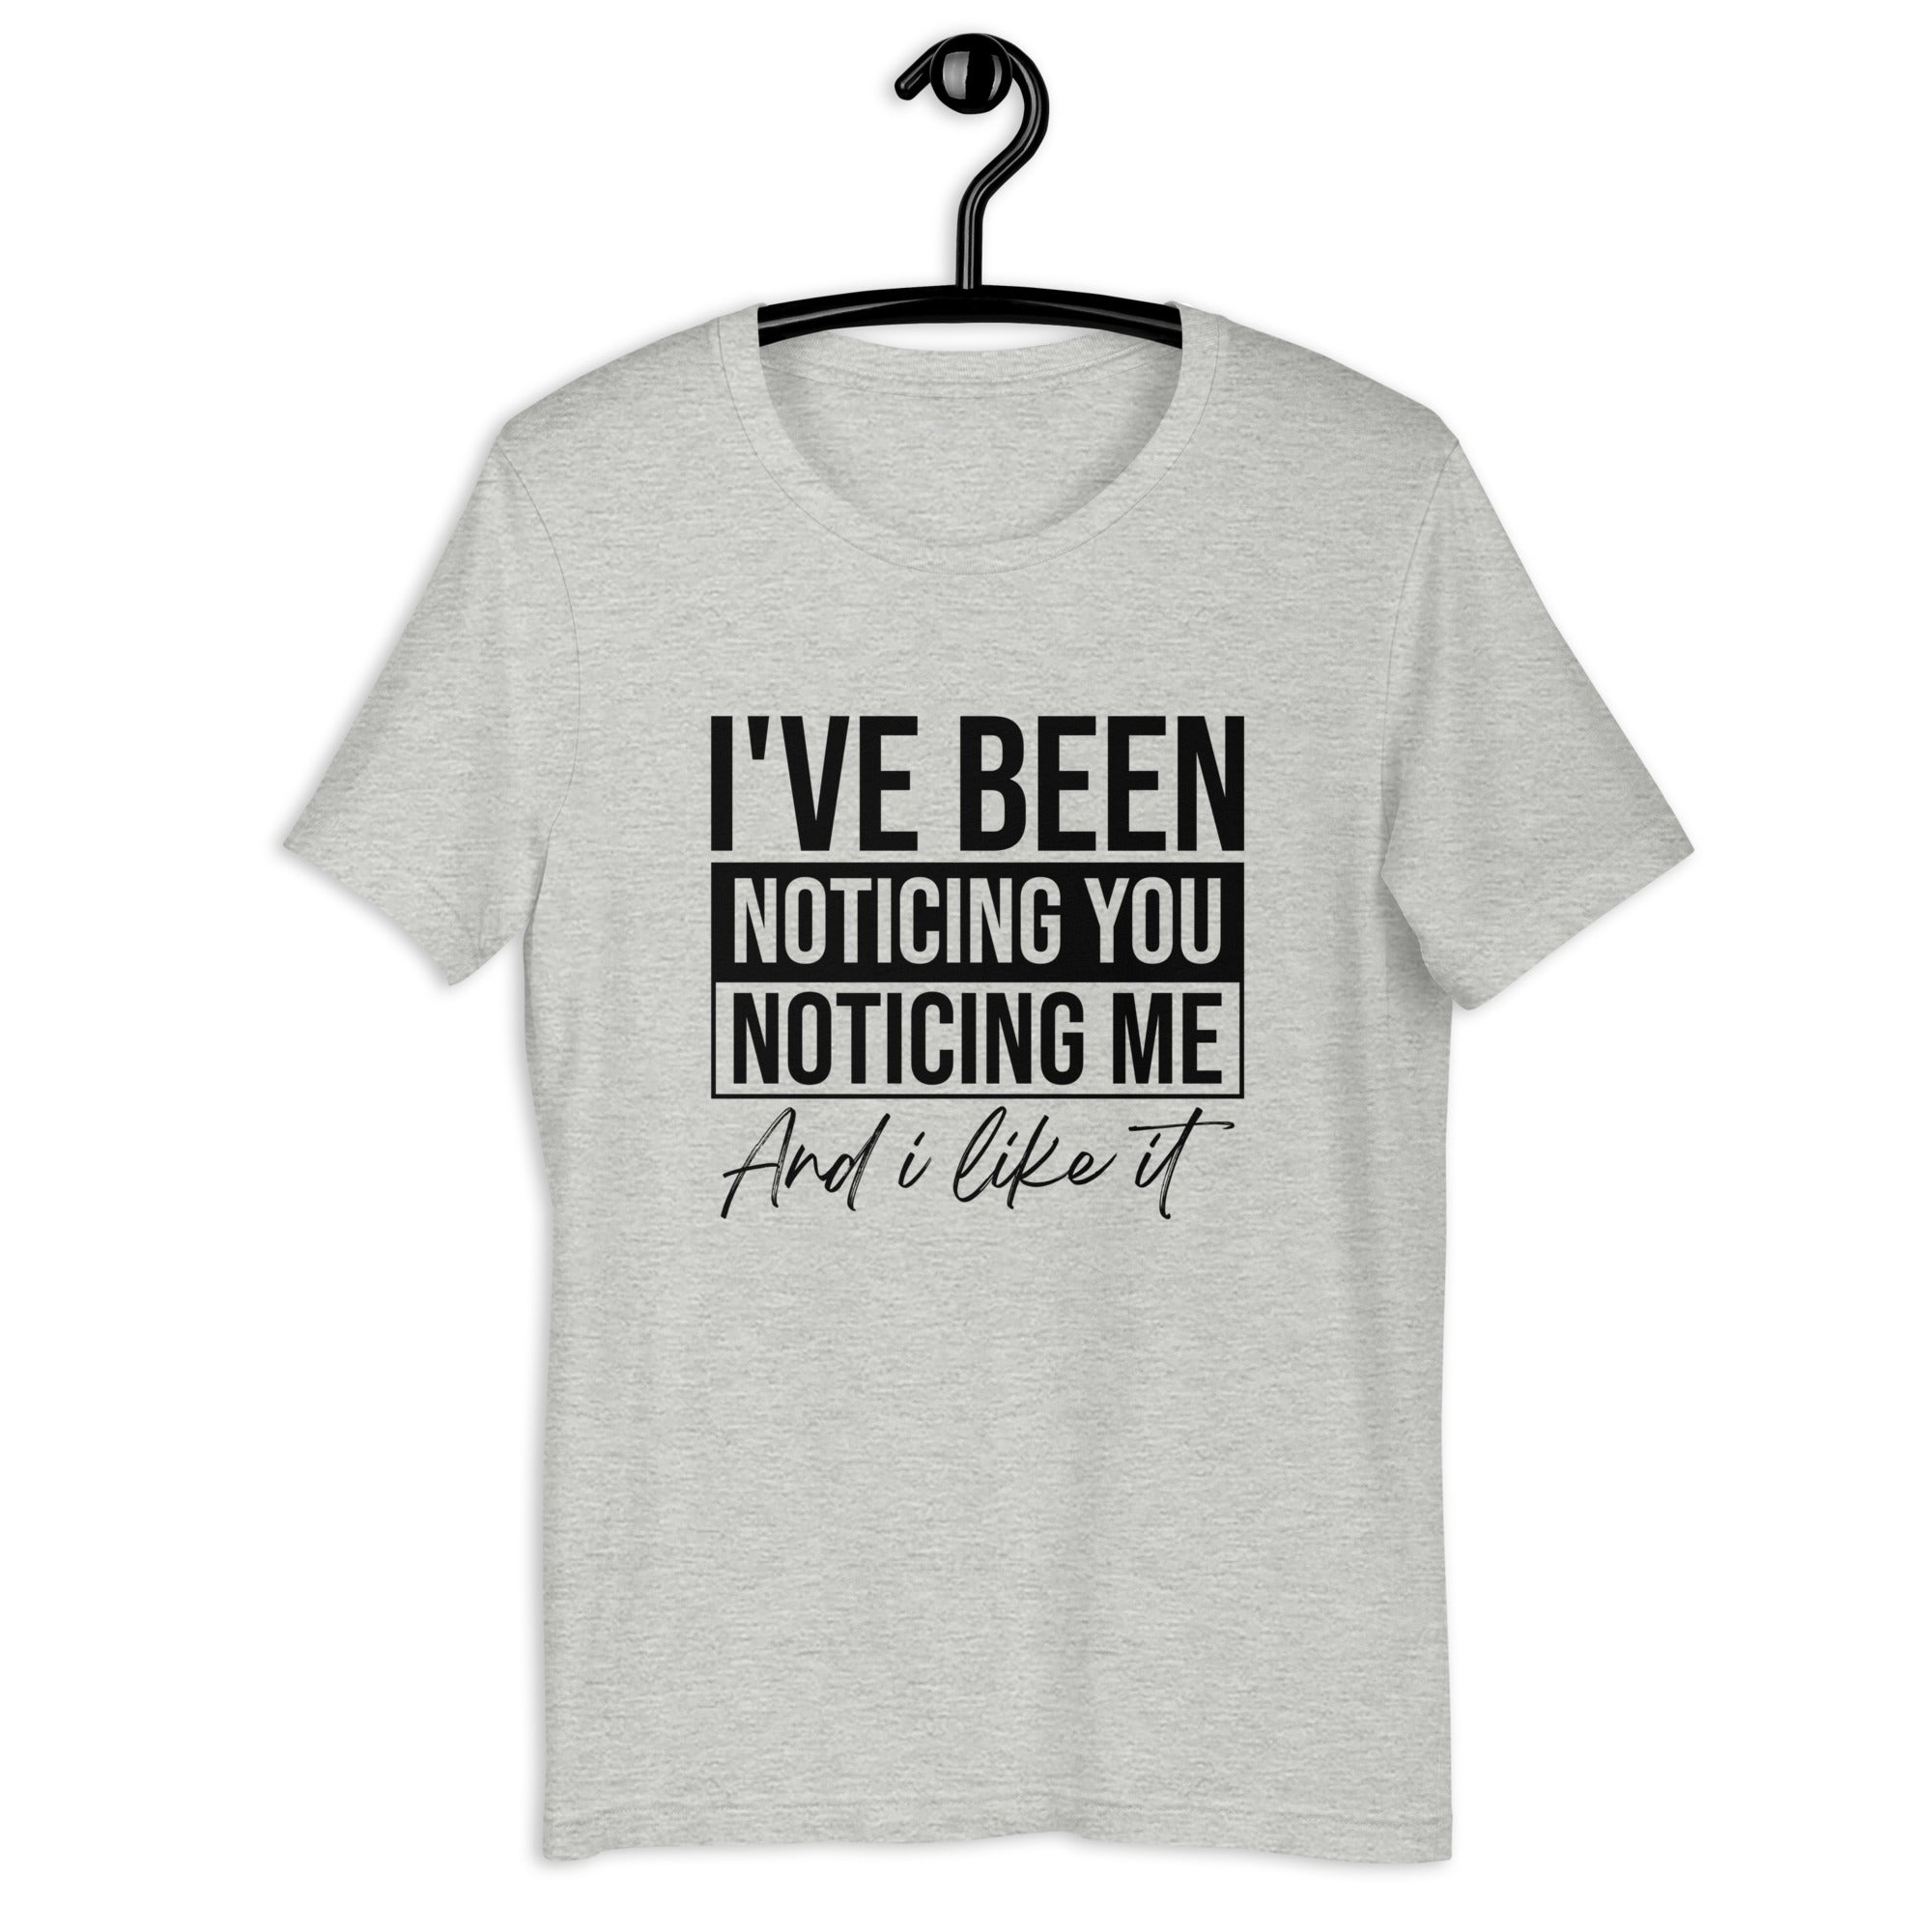 Unisex t-shirt | I've been noticing you noticing me and I like it